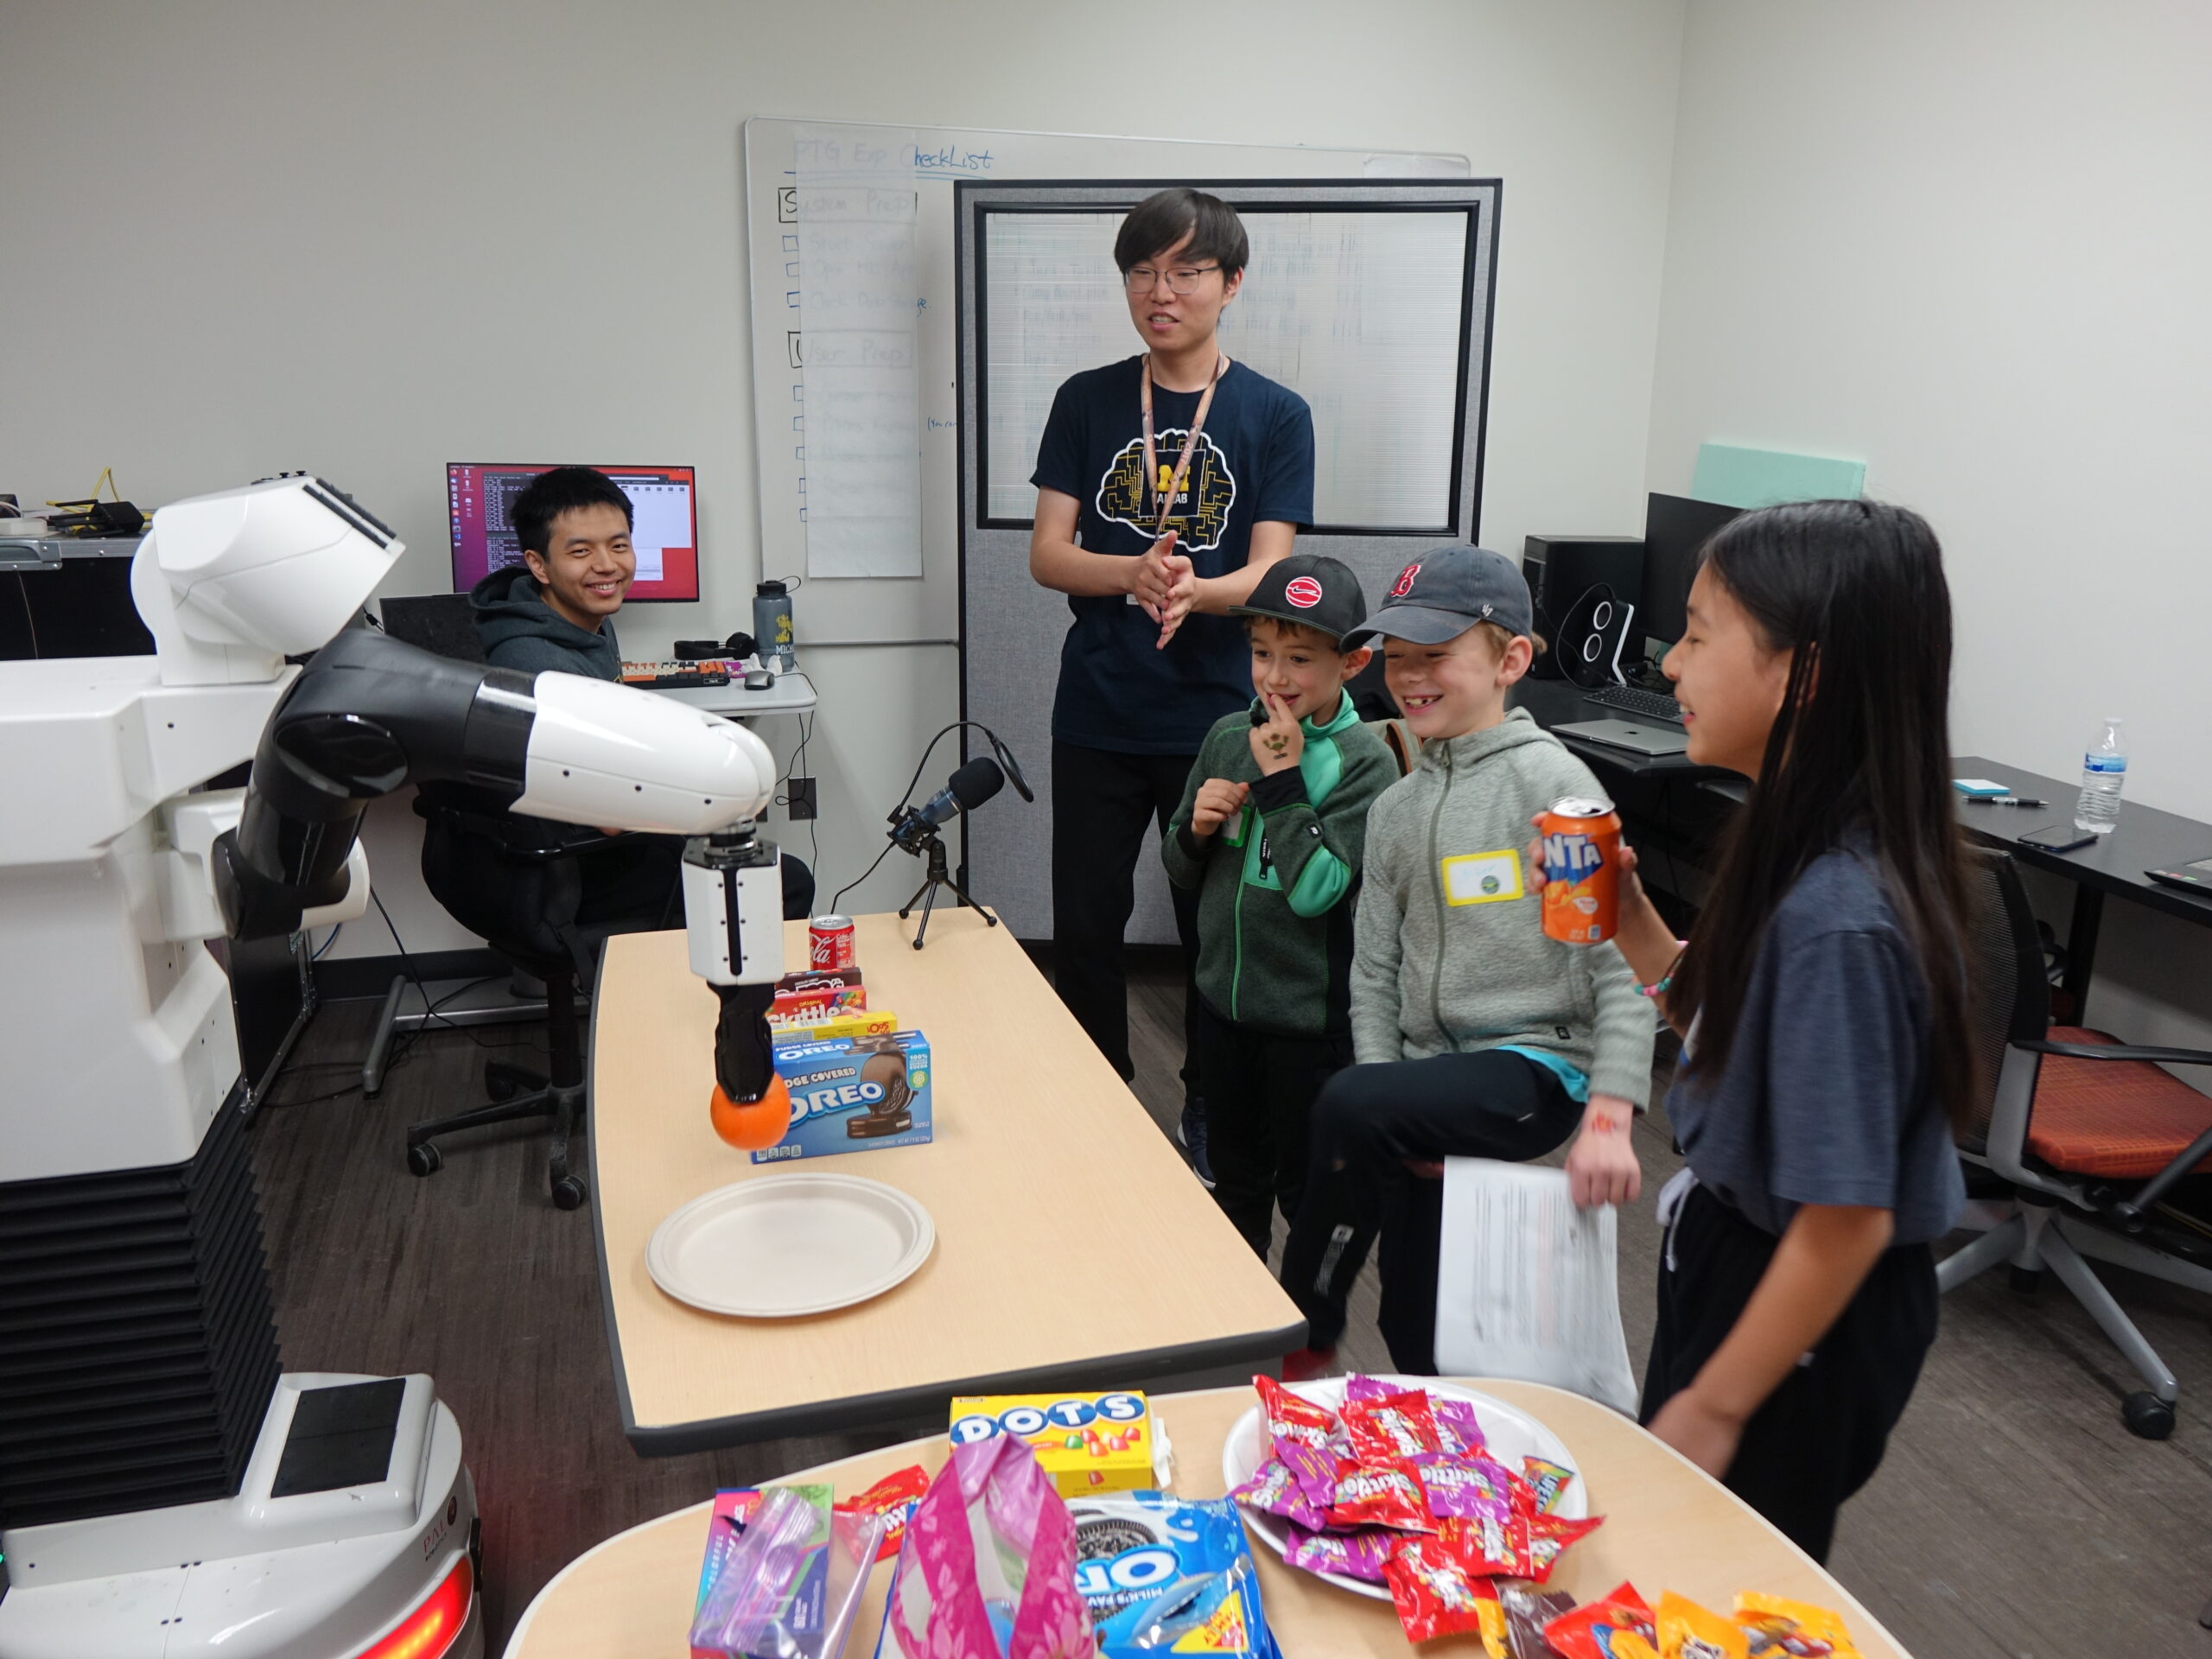 Three kids interact with a robot across a table as it selects and picks up items. A grad student stands nearby, supervising.